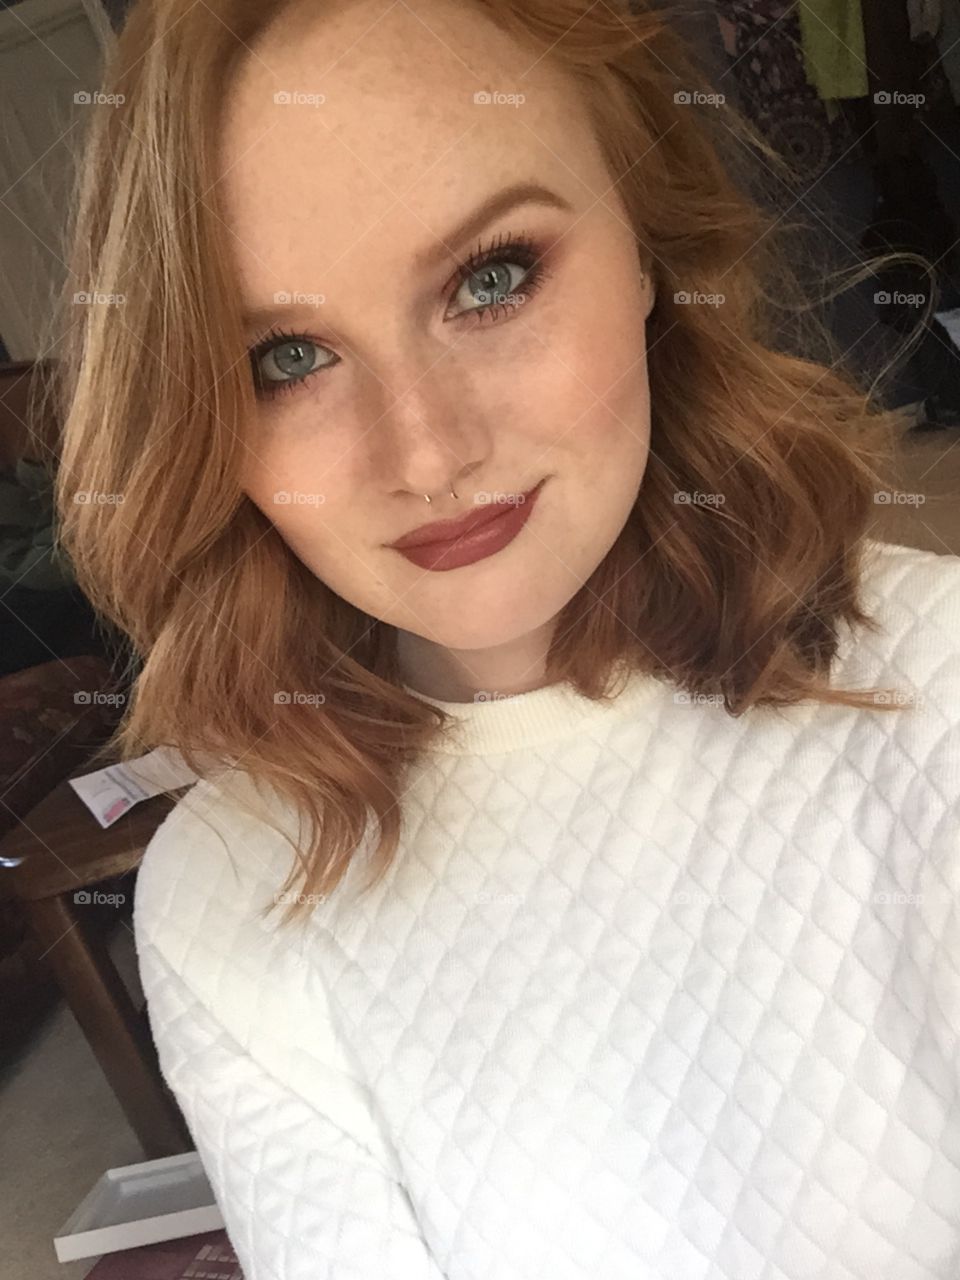 Redhead girl with makeup 